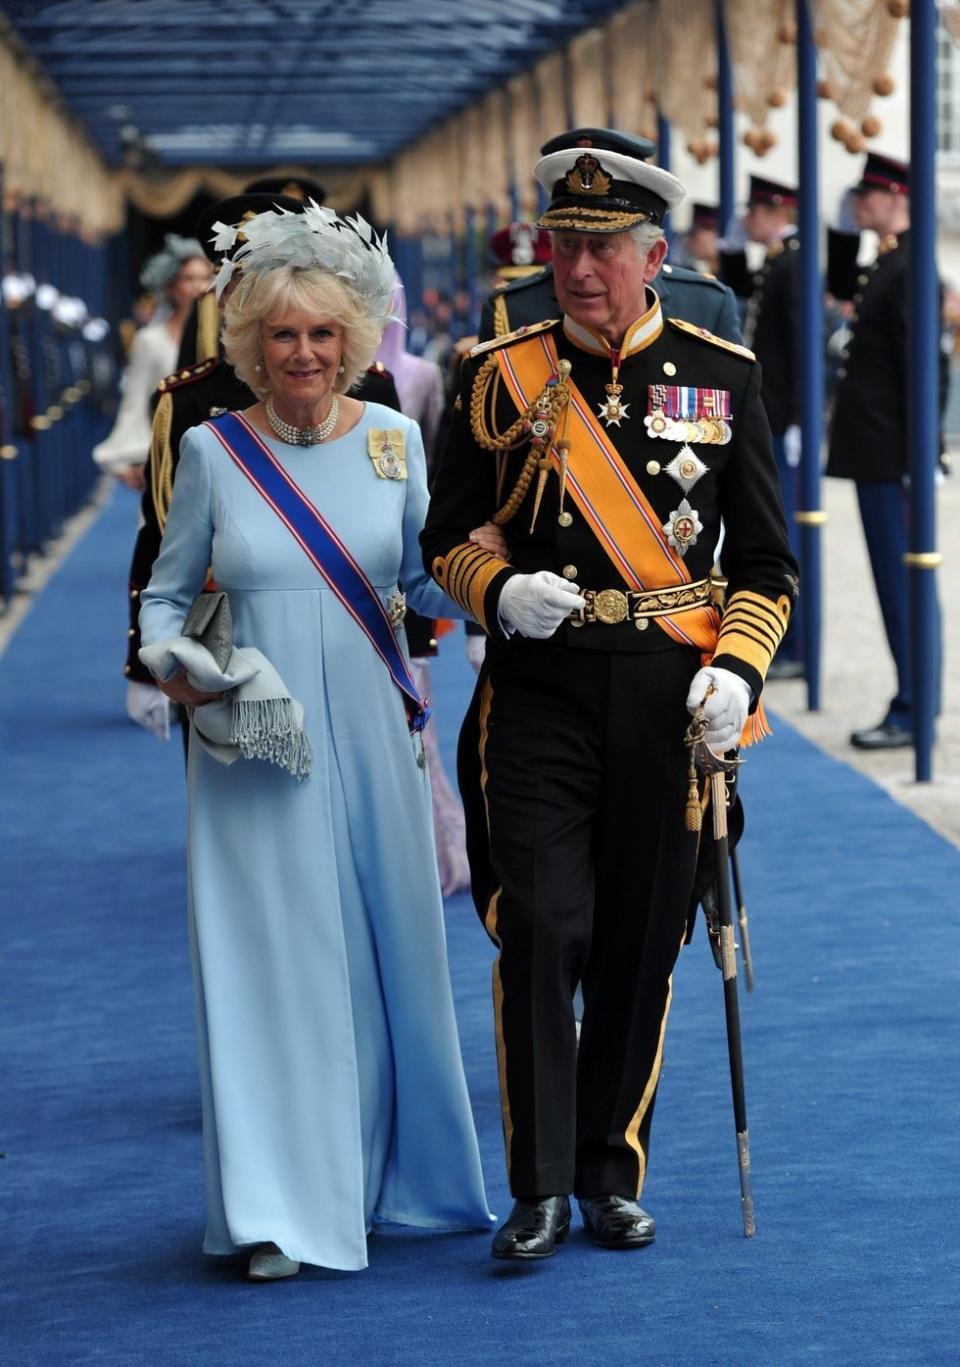 <p>The inauguration of King Willem Alexander of the Netherlands was naturally a very special occasion, with called for an appropriately regal outfit for Camilla in pale robin's egg blue with a feathered fascinator and sash.</p>